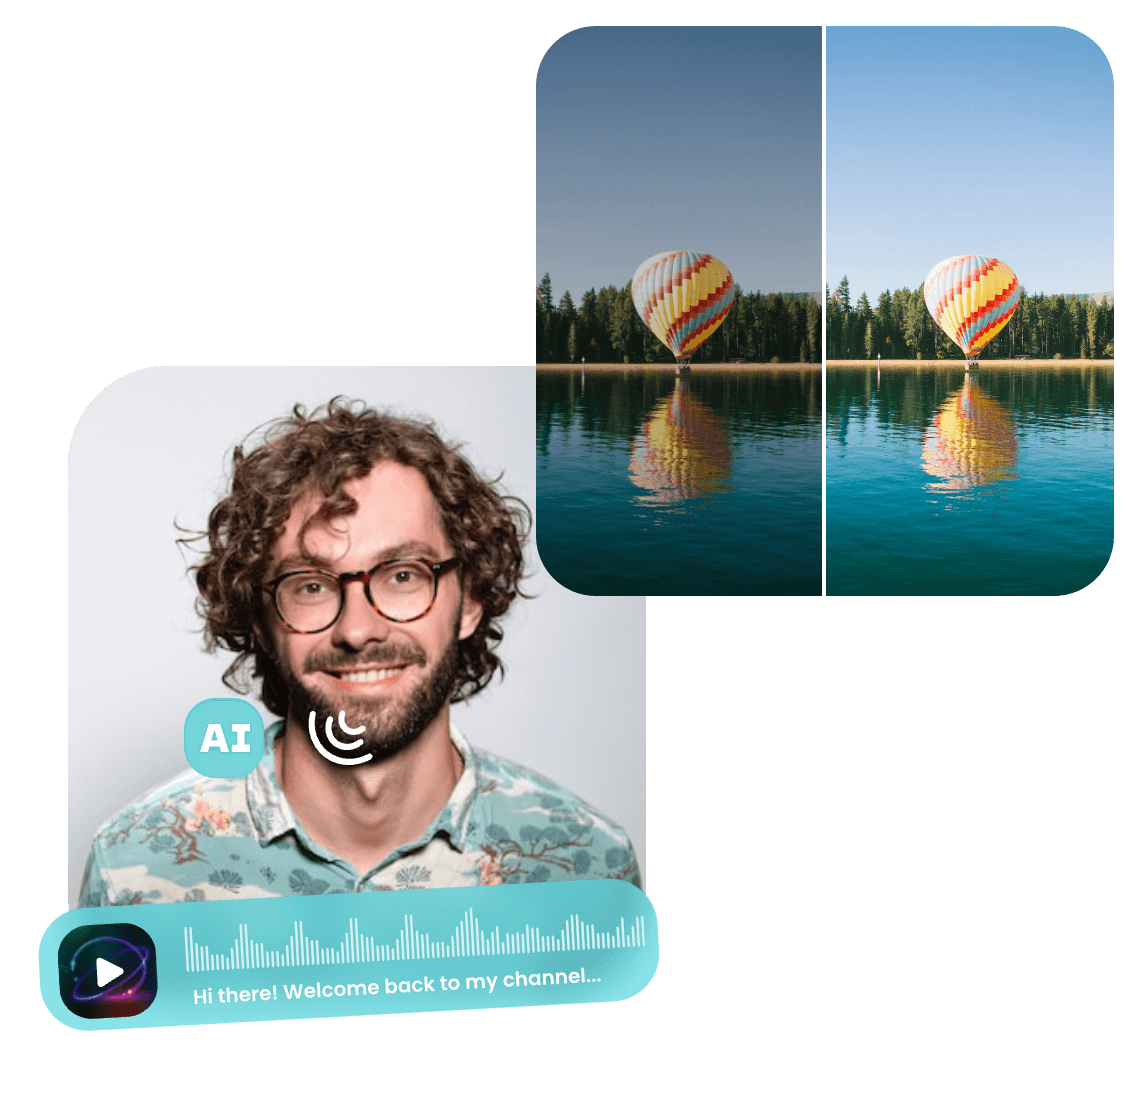 use Clipfly's AI video enhancer and AI talking avatar feature to refine videos